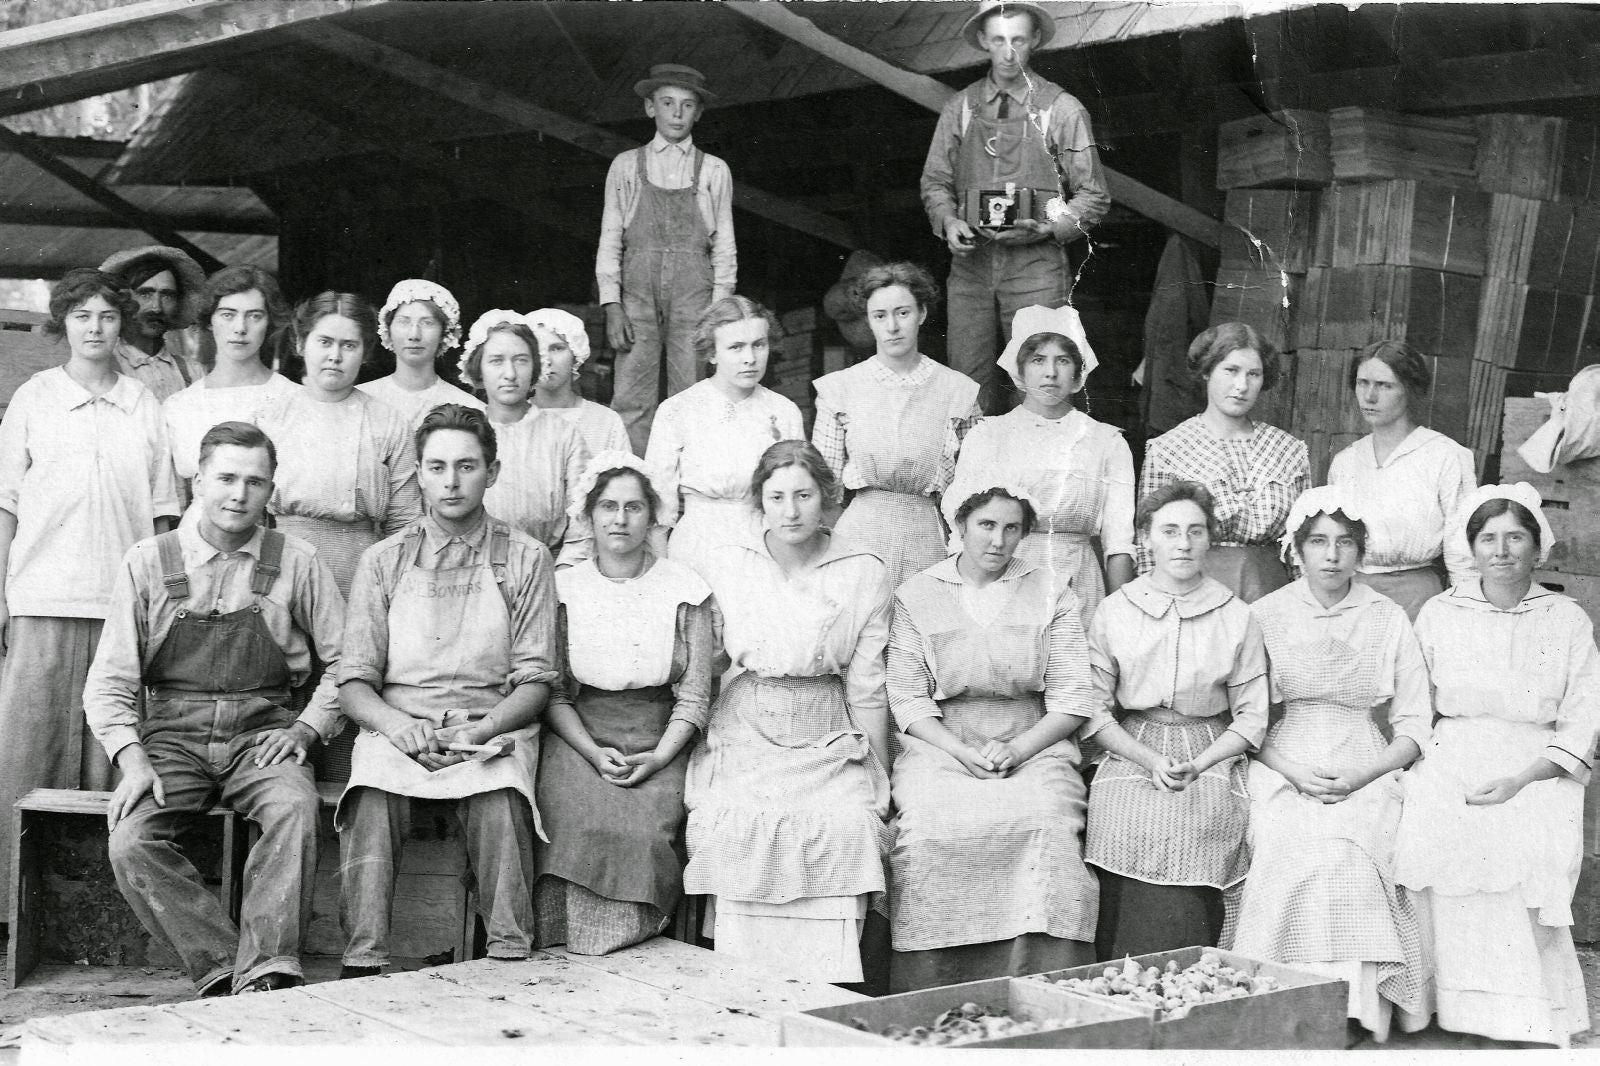 State St. prune packing shed workers pose for the camera